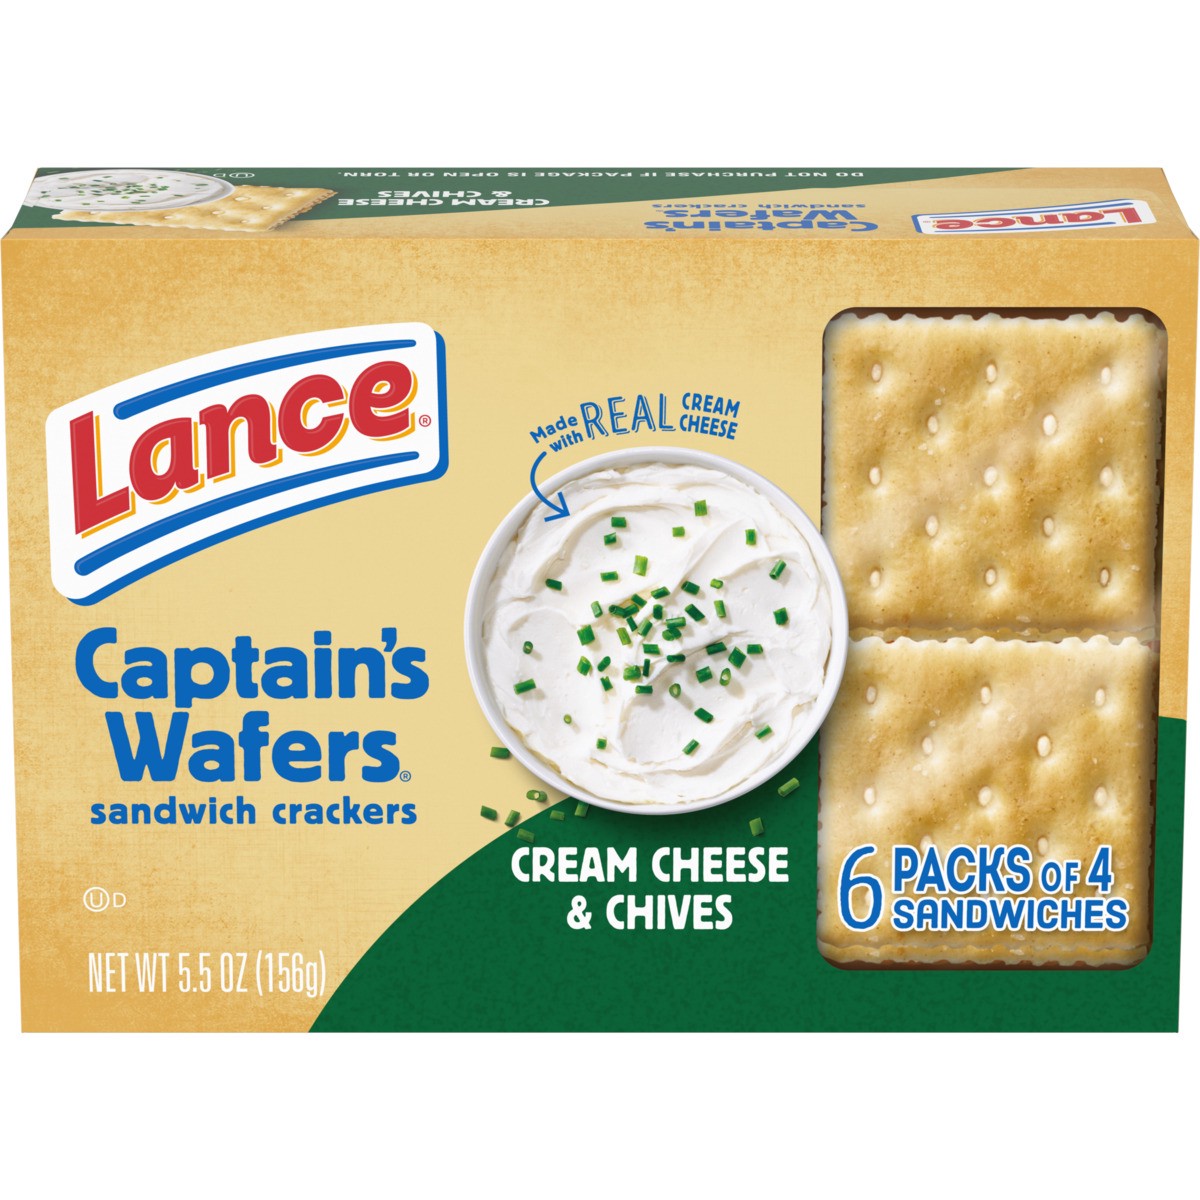 slide 2 of 11, Lance Sandwich Crackers, Captain's Wafers Cream Cheese and Chives, 6 Packs, 4 Sandwiches Each, 5.5 oz